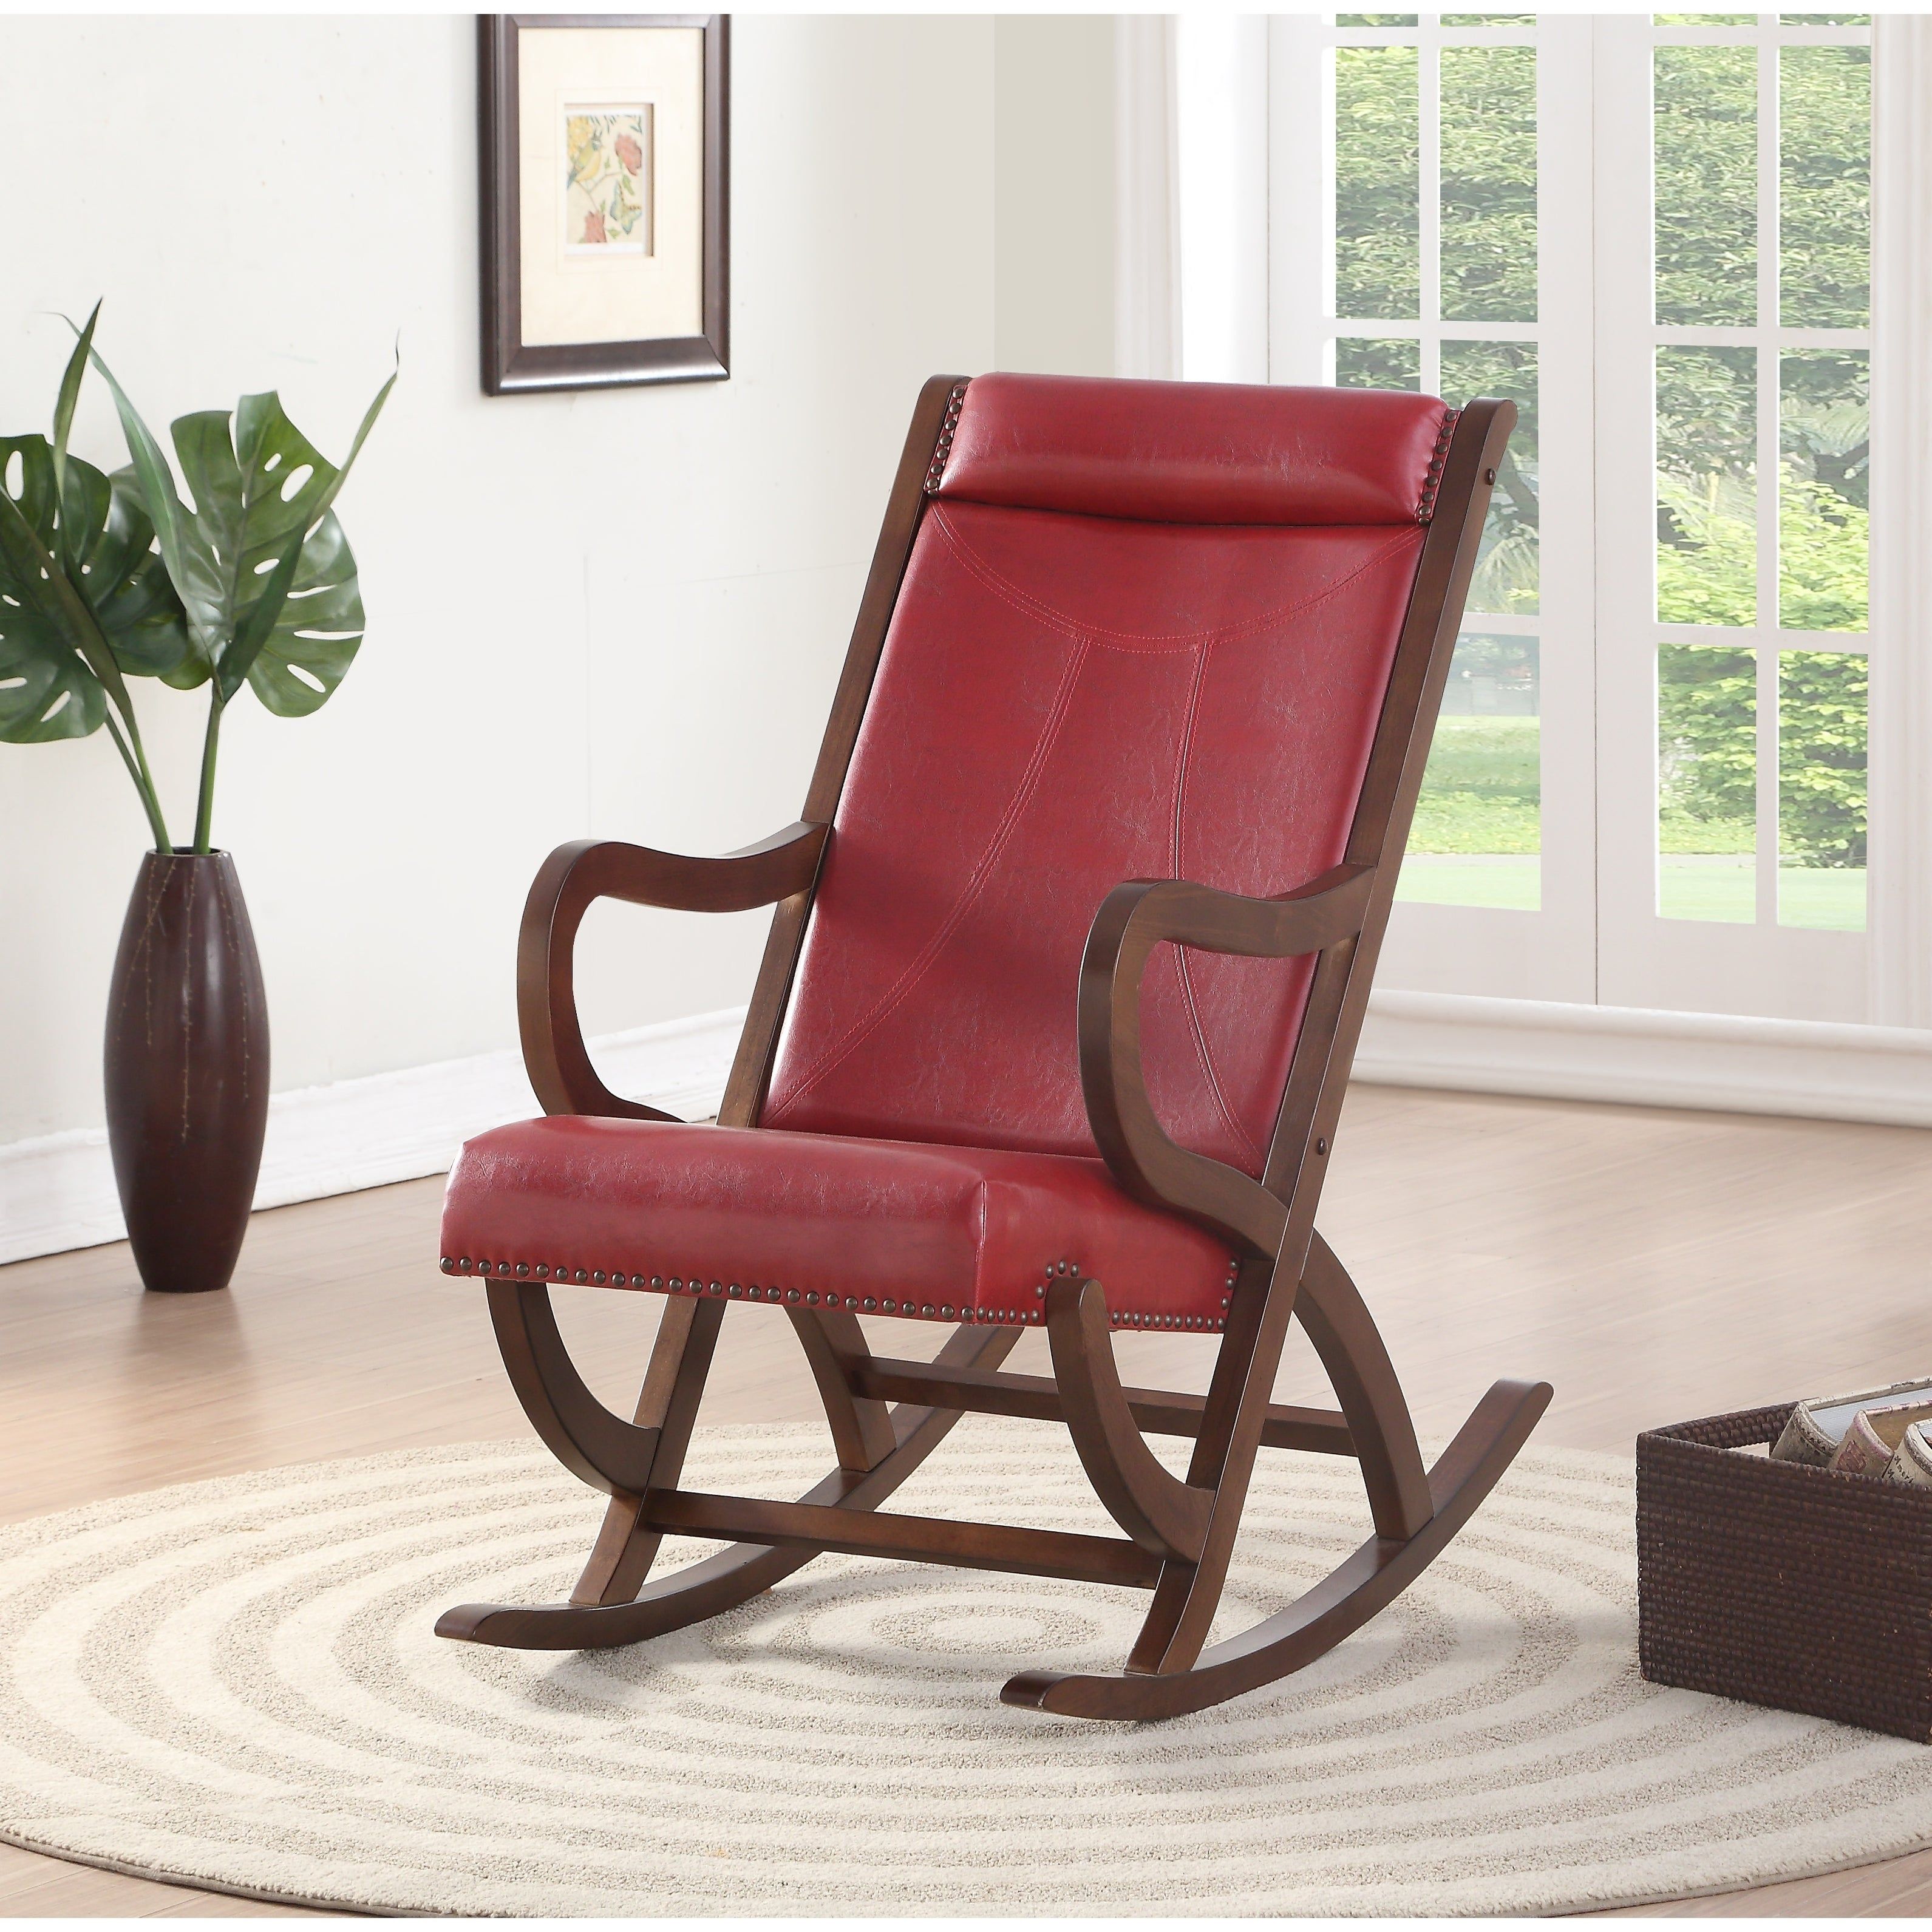 Buy Rocking Chairs, Traditional Living Room Chairs Online At With Regard To Judson Traditional Rocking Chairs (Photo 3 of 20)